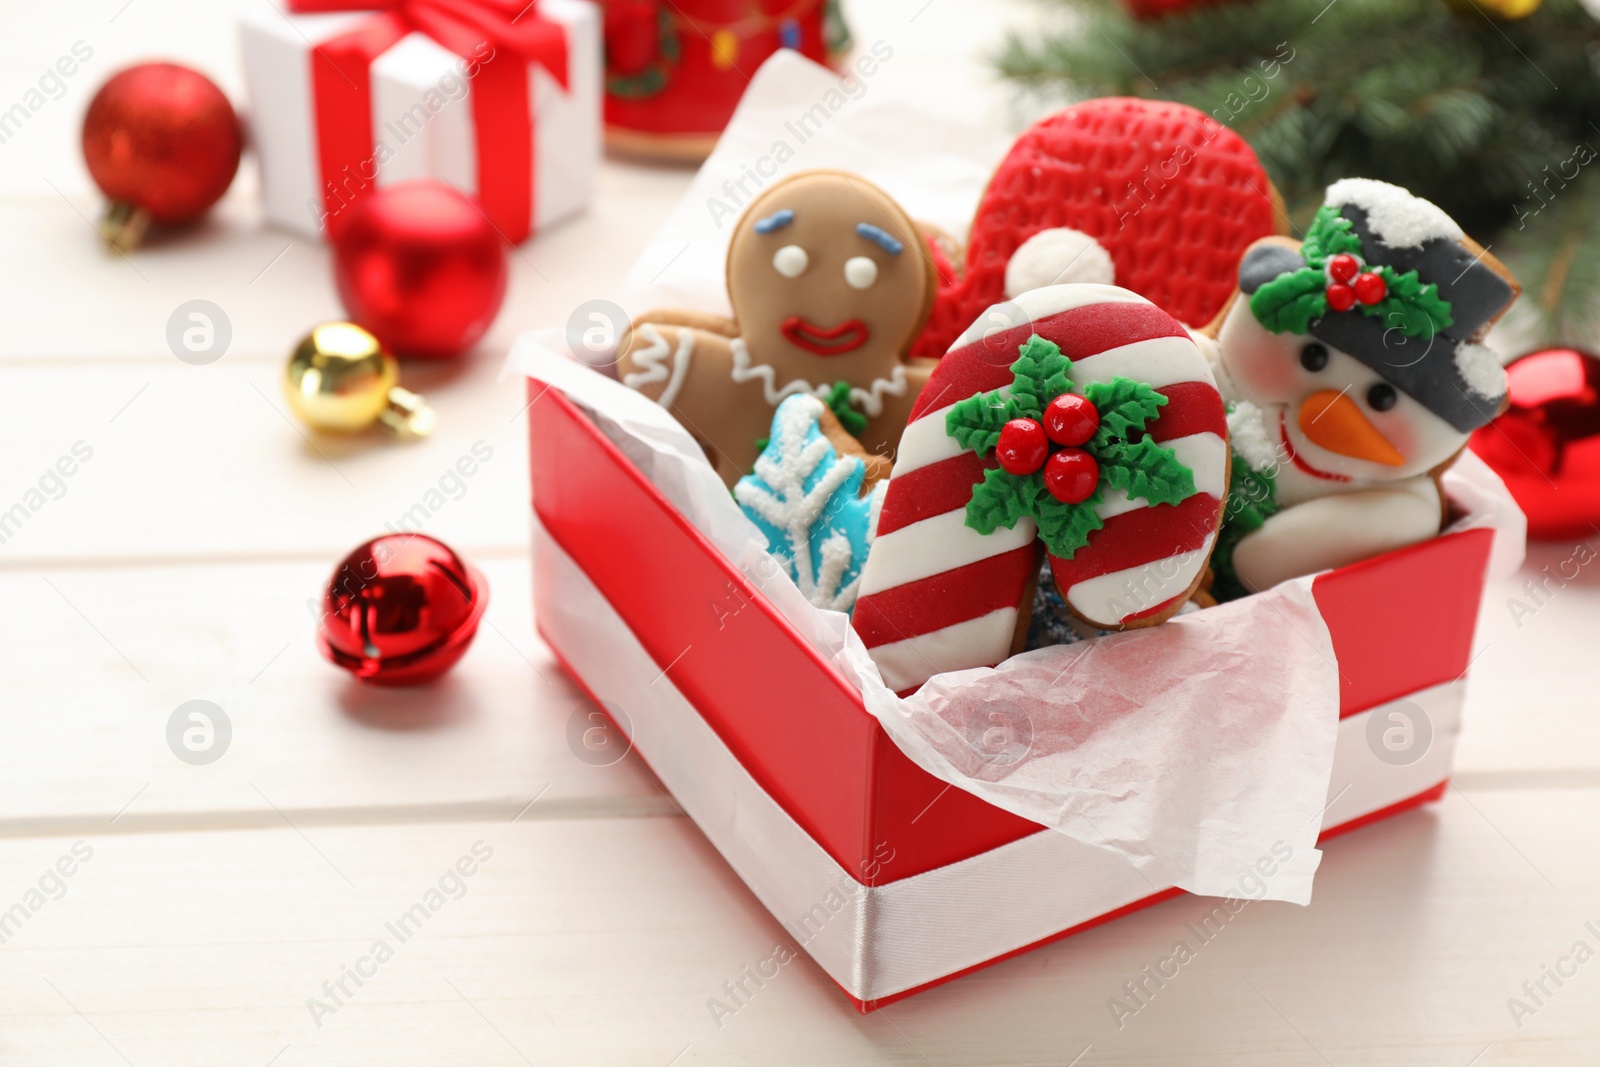 Photo of Delicious homemade Christmas cookies and festive decor on white wooden table, closeup